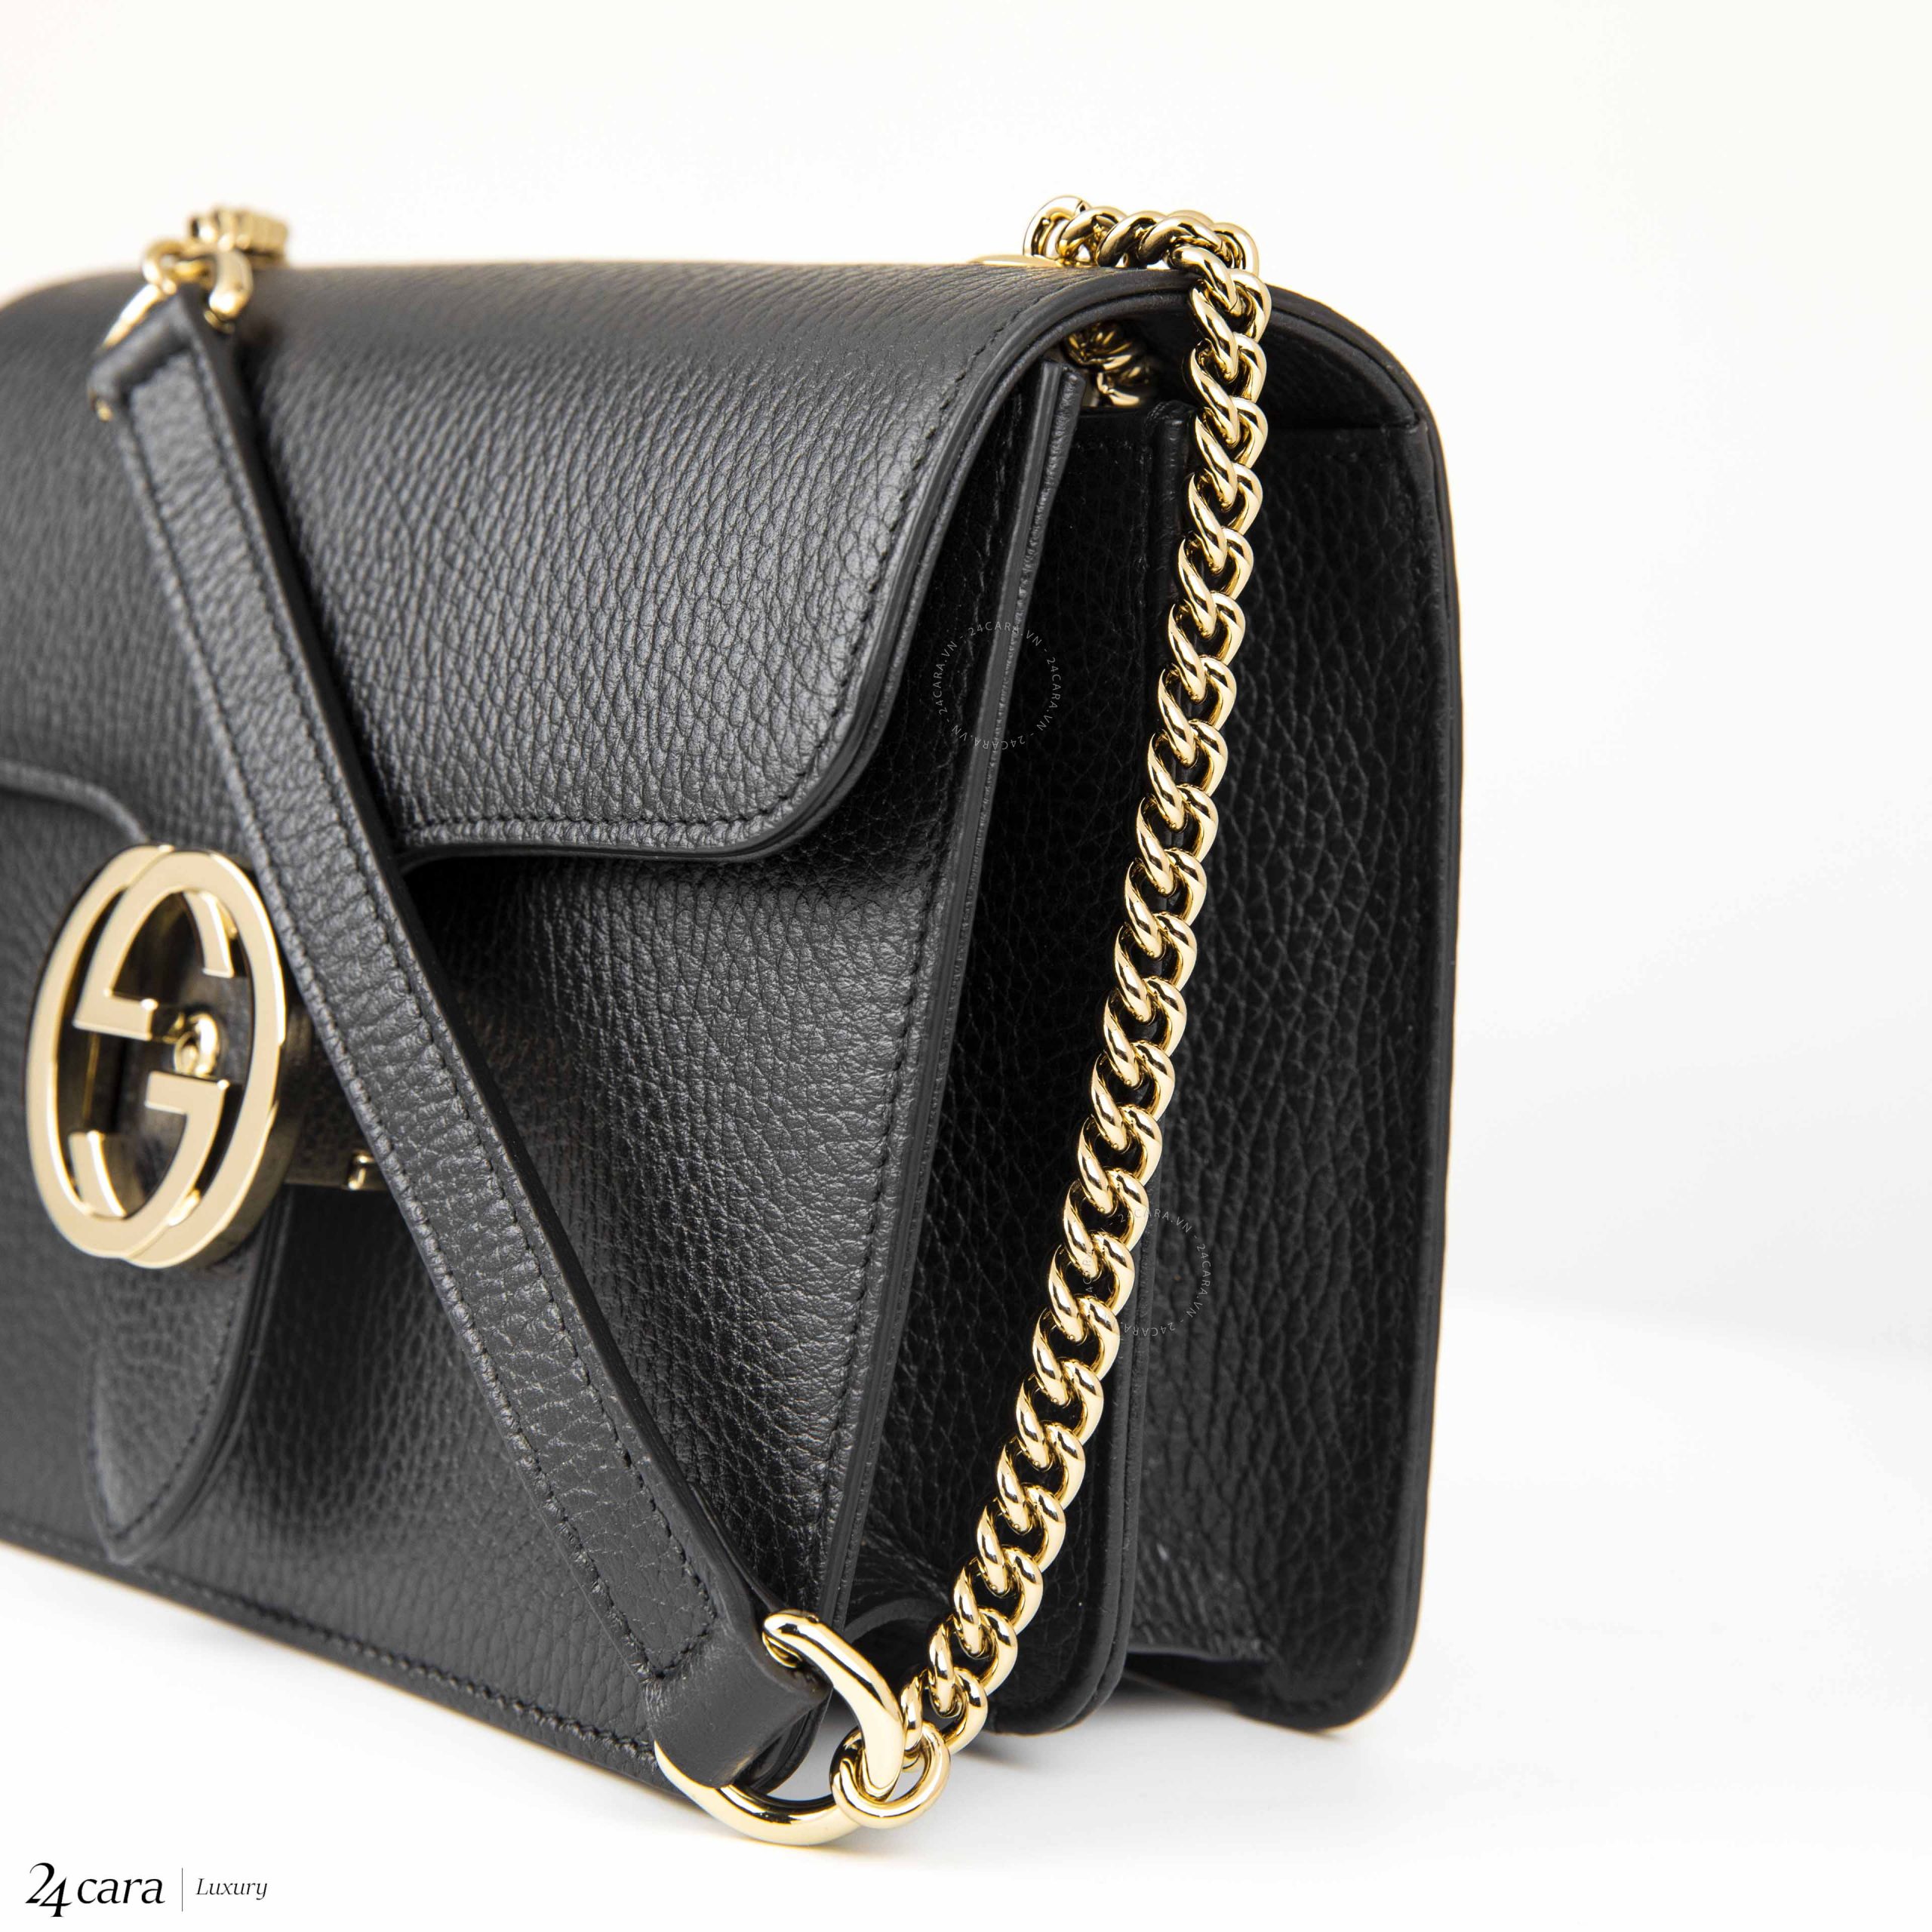 Gucci Interlocking Chain Crossbody Bag Review | The Art of Mike Mignola